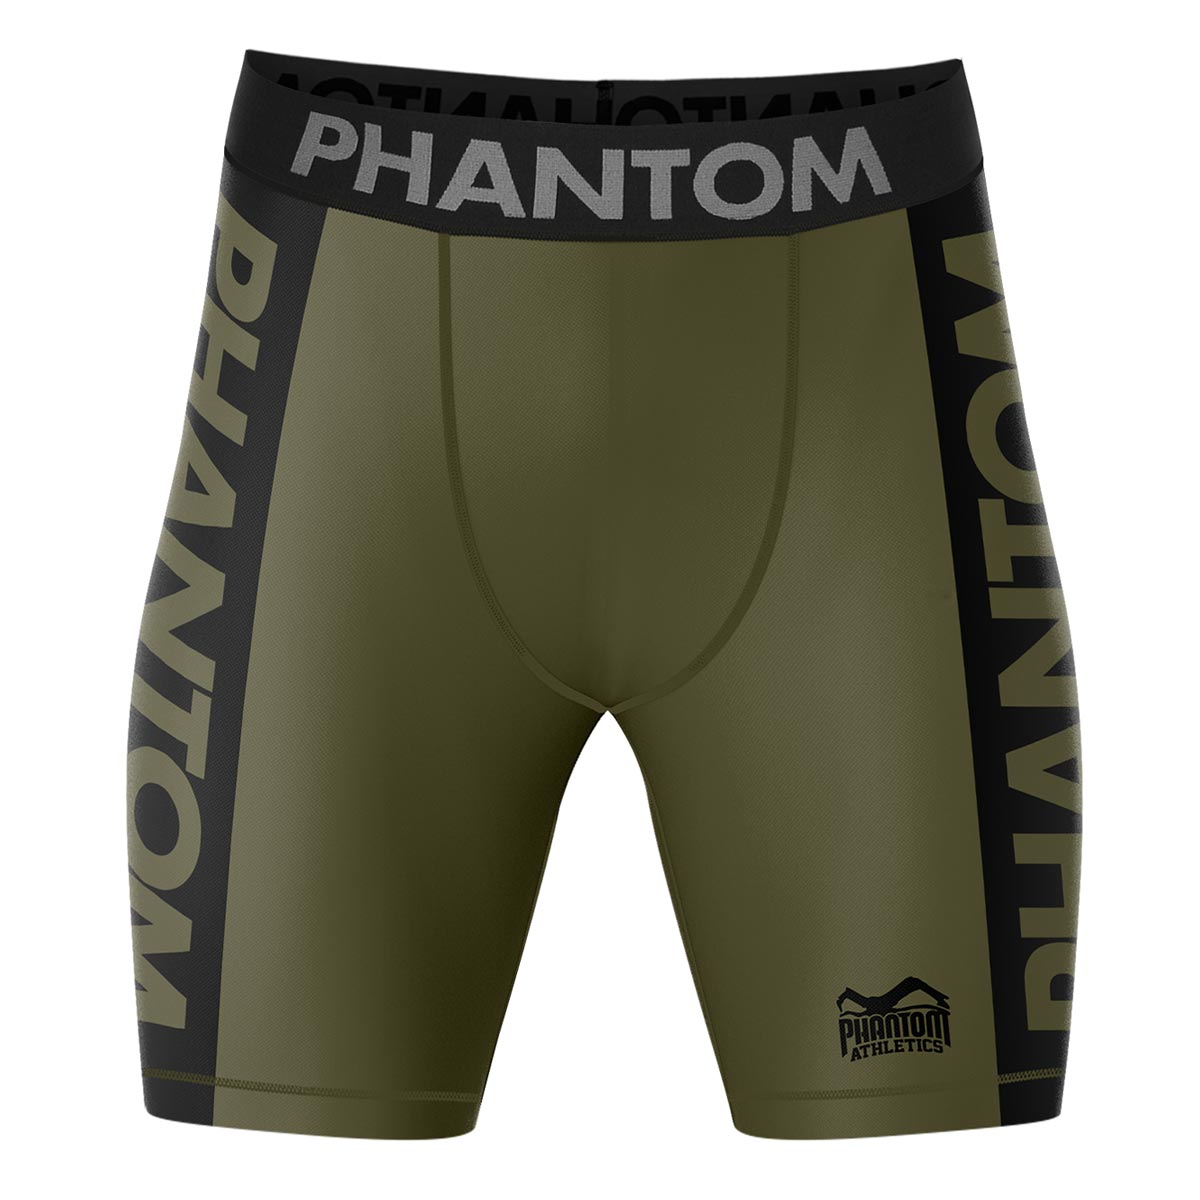 Phantom compression fight shorts in army/green. Ultimate comfort and freedom of movement. Ideal for your martial arts. 